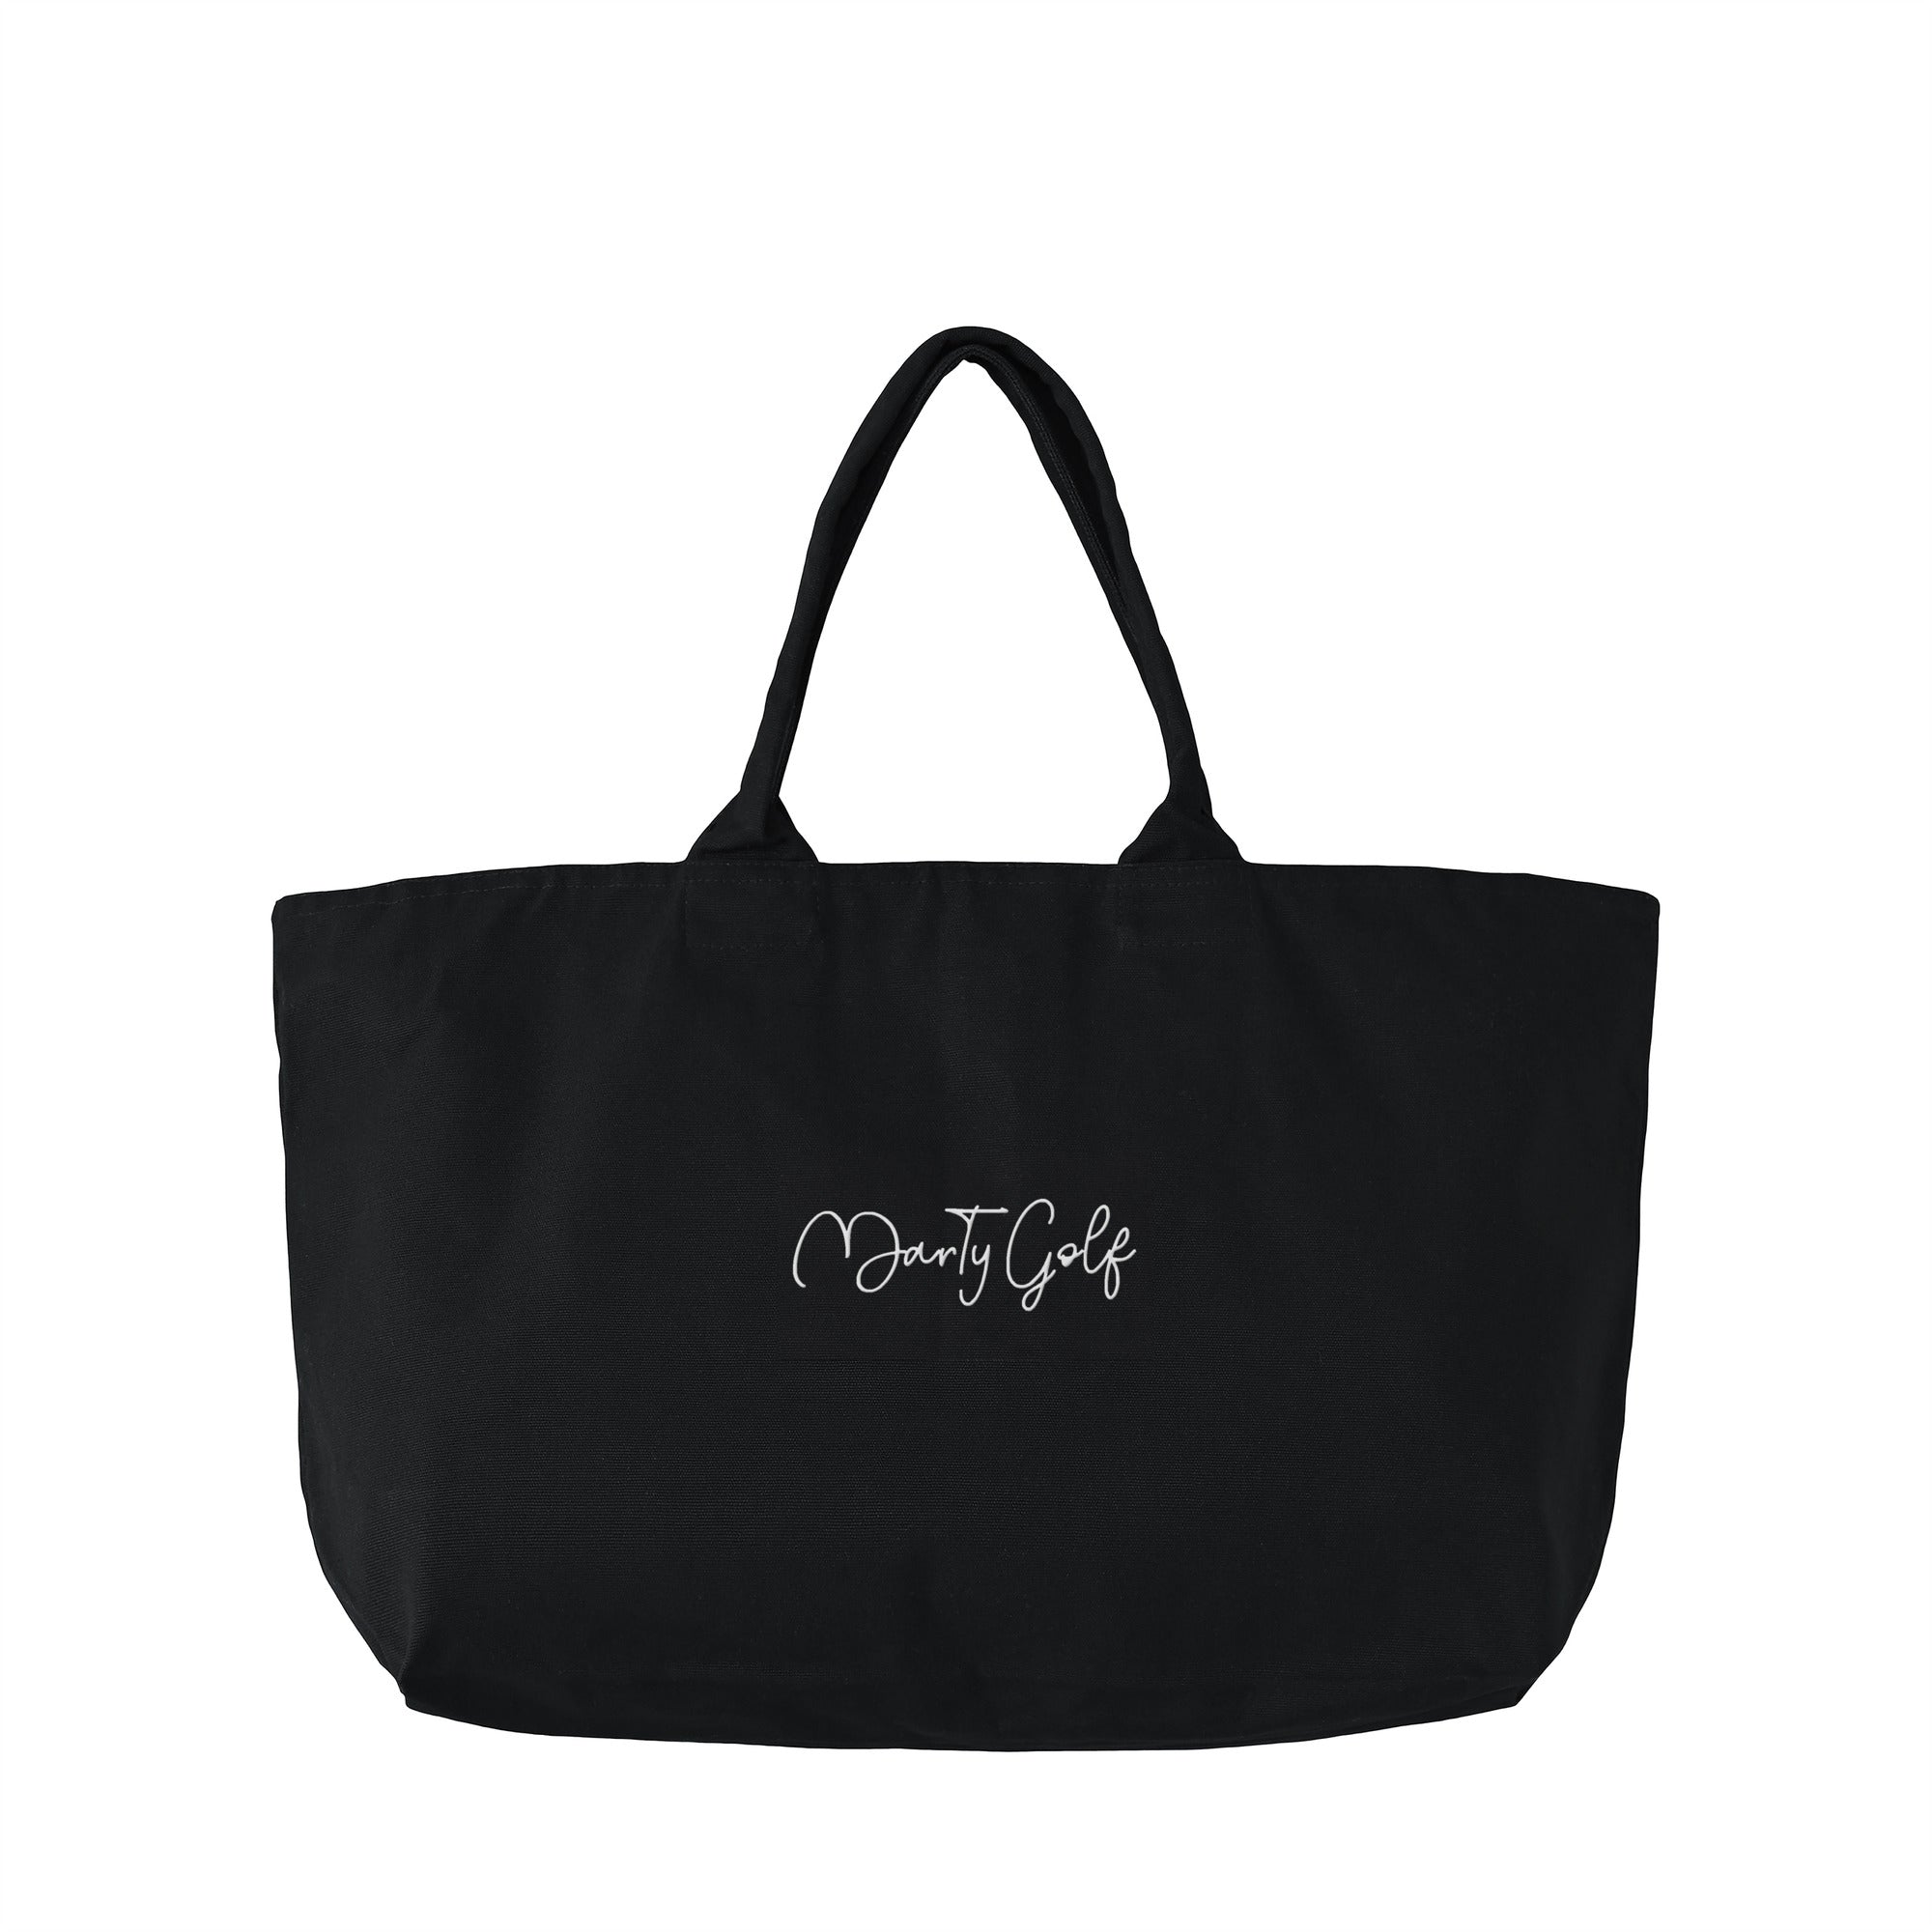 Marty tote Bag（Black） – Marty Golf